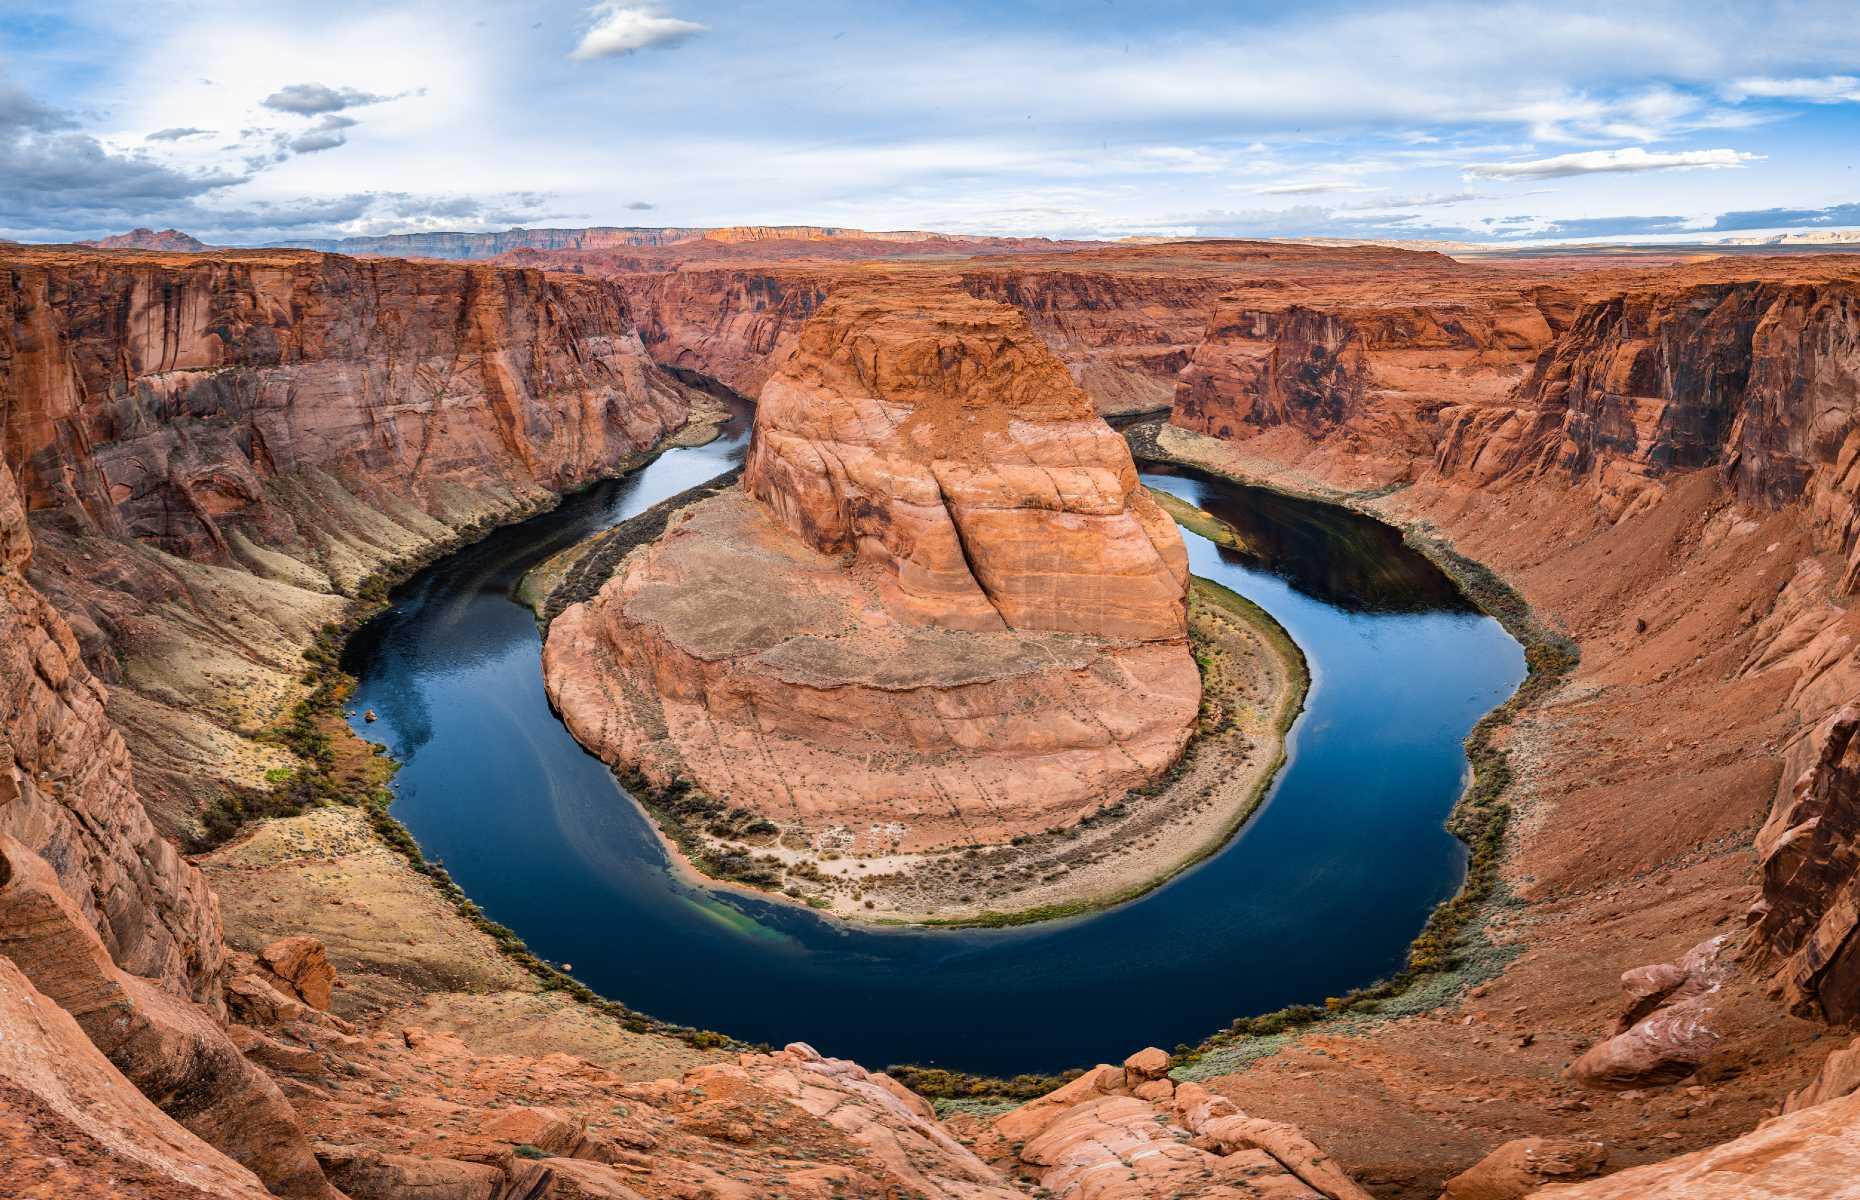 <p>From its source in the Rocky Mountains to its mouth in the Gulf of California, the Colorado River is America’s fifth-longest river. Its drainage basin furnishes 40 million people with fresh water, encompassing parts of seven states, 29 tribal nations and a 17-mile (27km) stretch of the international boundary with Mexico. Often called the ‘Lifeline of the Southwest’, the river is crucially maintained by two of the biggest reservoirs in the US: Lake Mead and Lake Powell. It famously flows through the Grand Canyon and the meanders of Horseshoe Bend (pictured).</p>